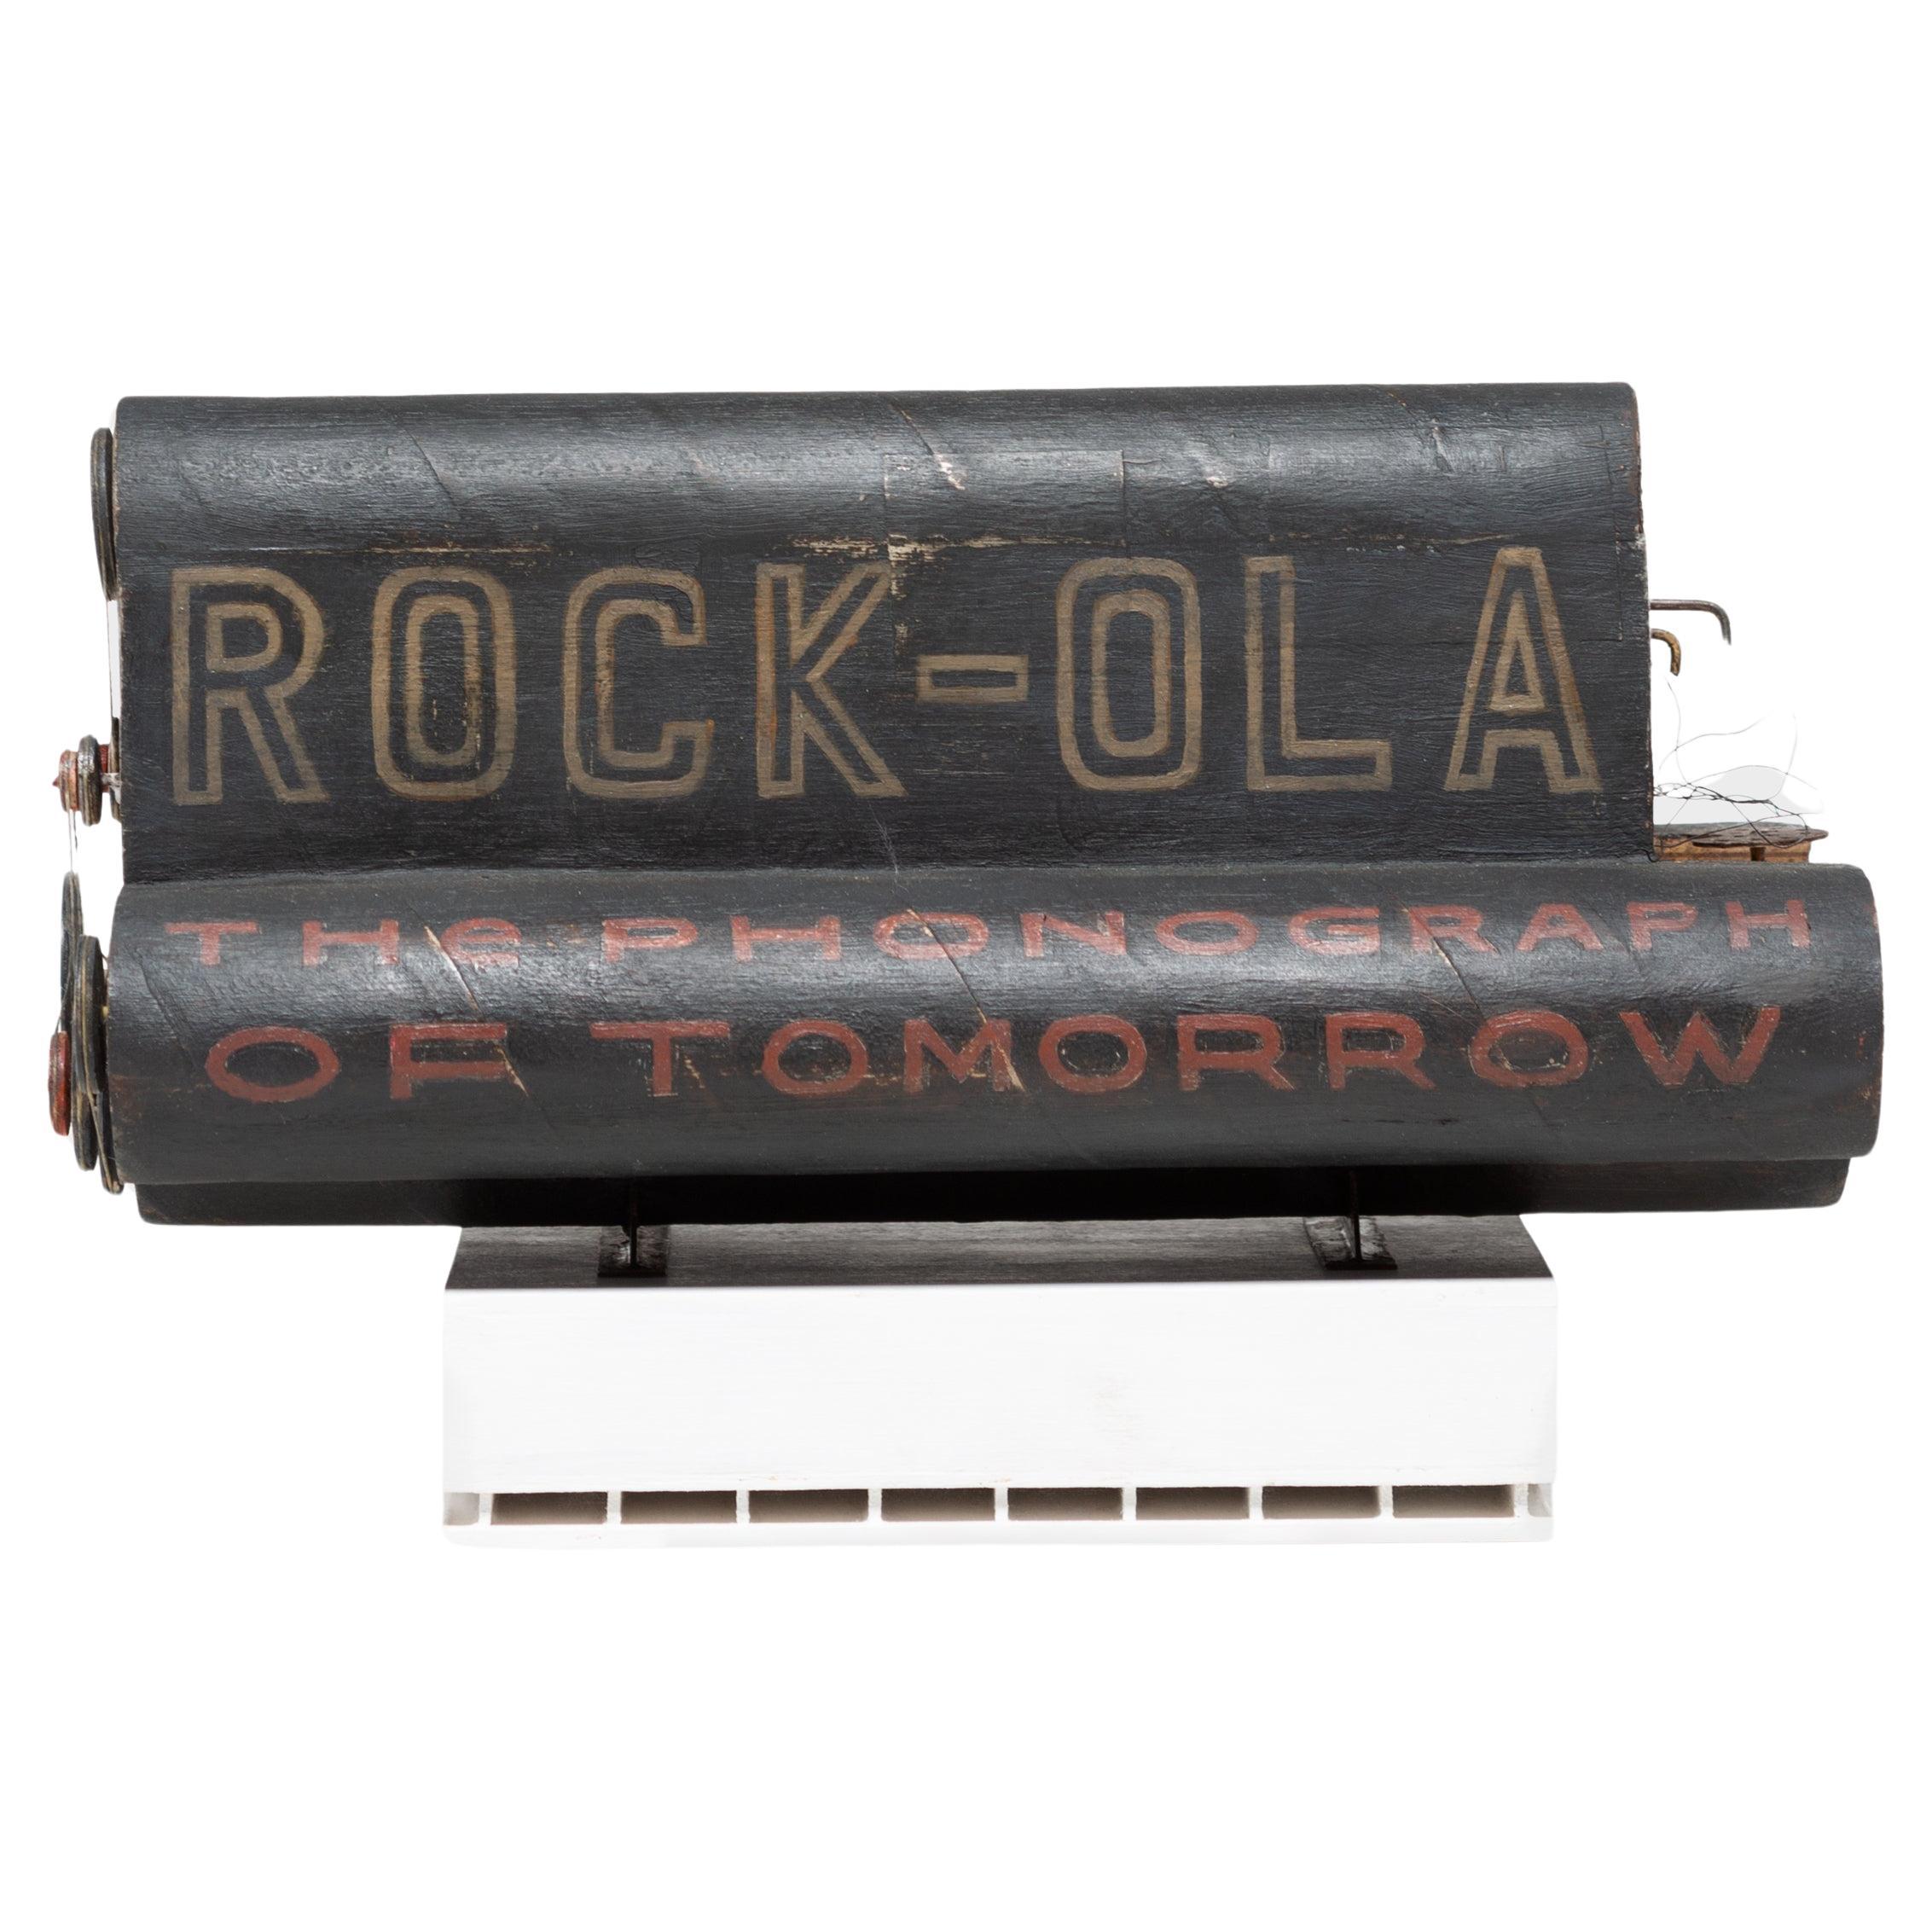 "Rock-Ola Car" by Patrick Fitzgerald, 2019 For Sale